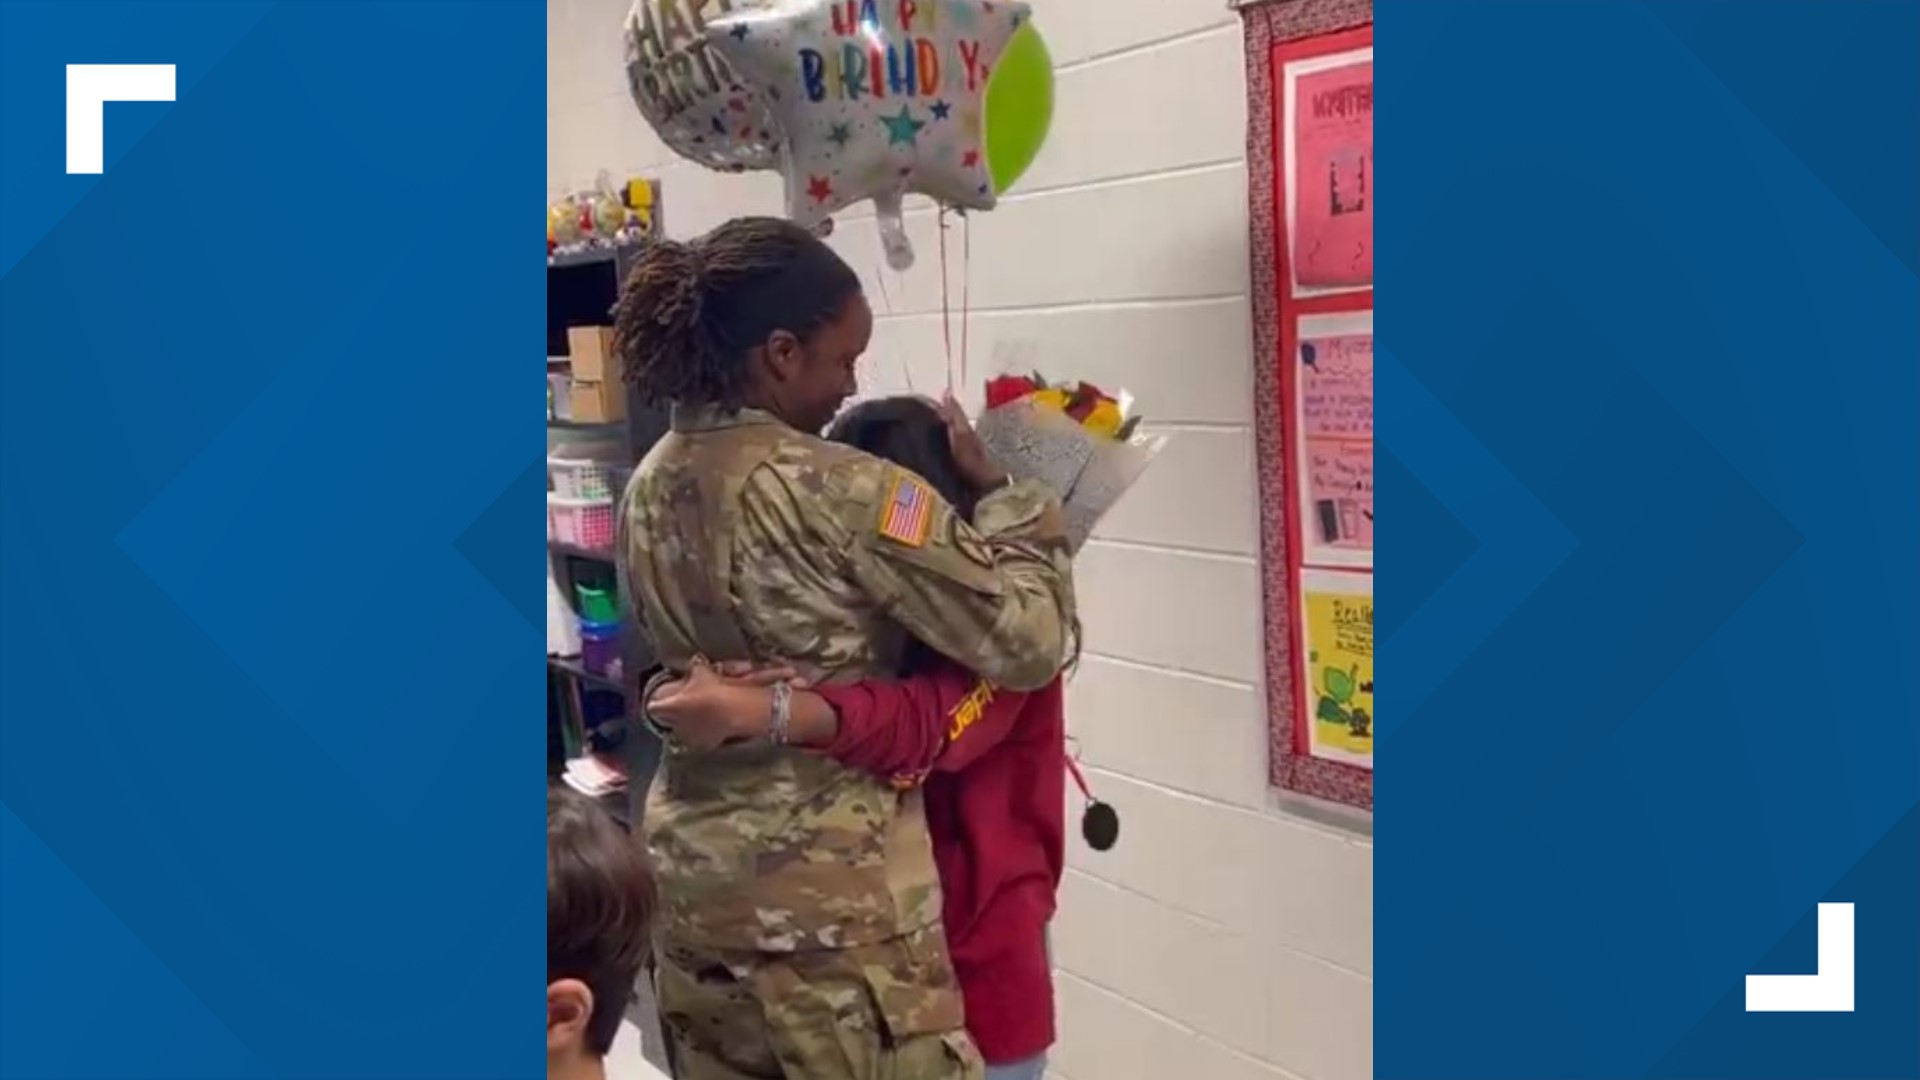 All of the emotions were captured on video when the girl's mom, having just returned home after a six-month deployment, walked into her daughter's class.